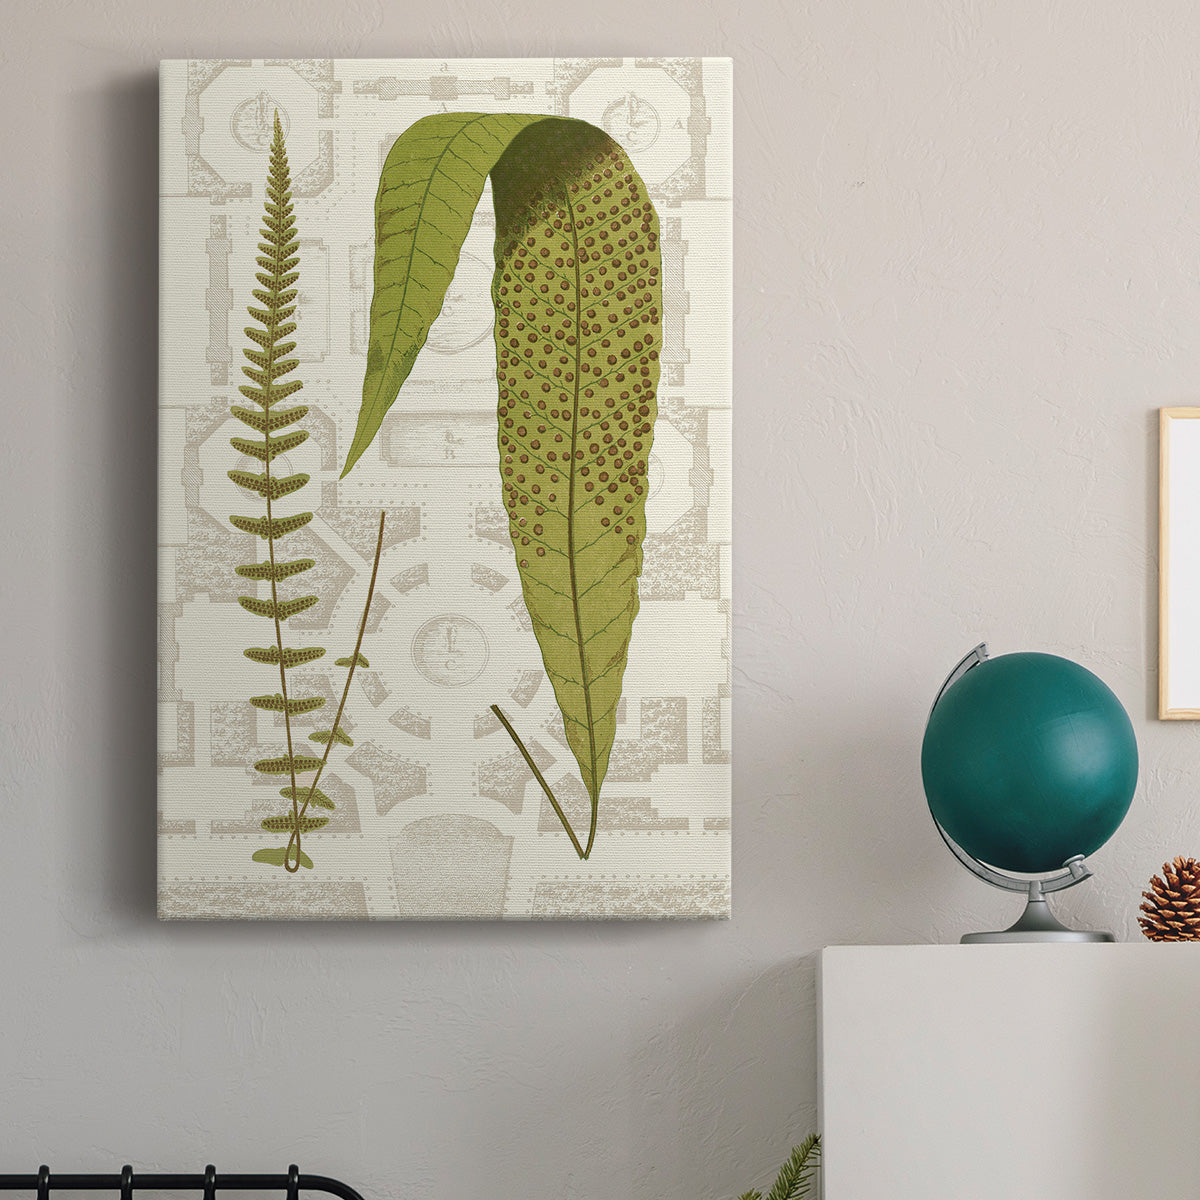 Garden Ferns III Premium Gallery Wrapped Canvas - Ready to Hang